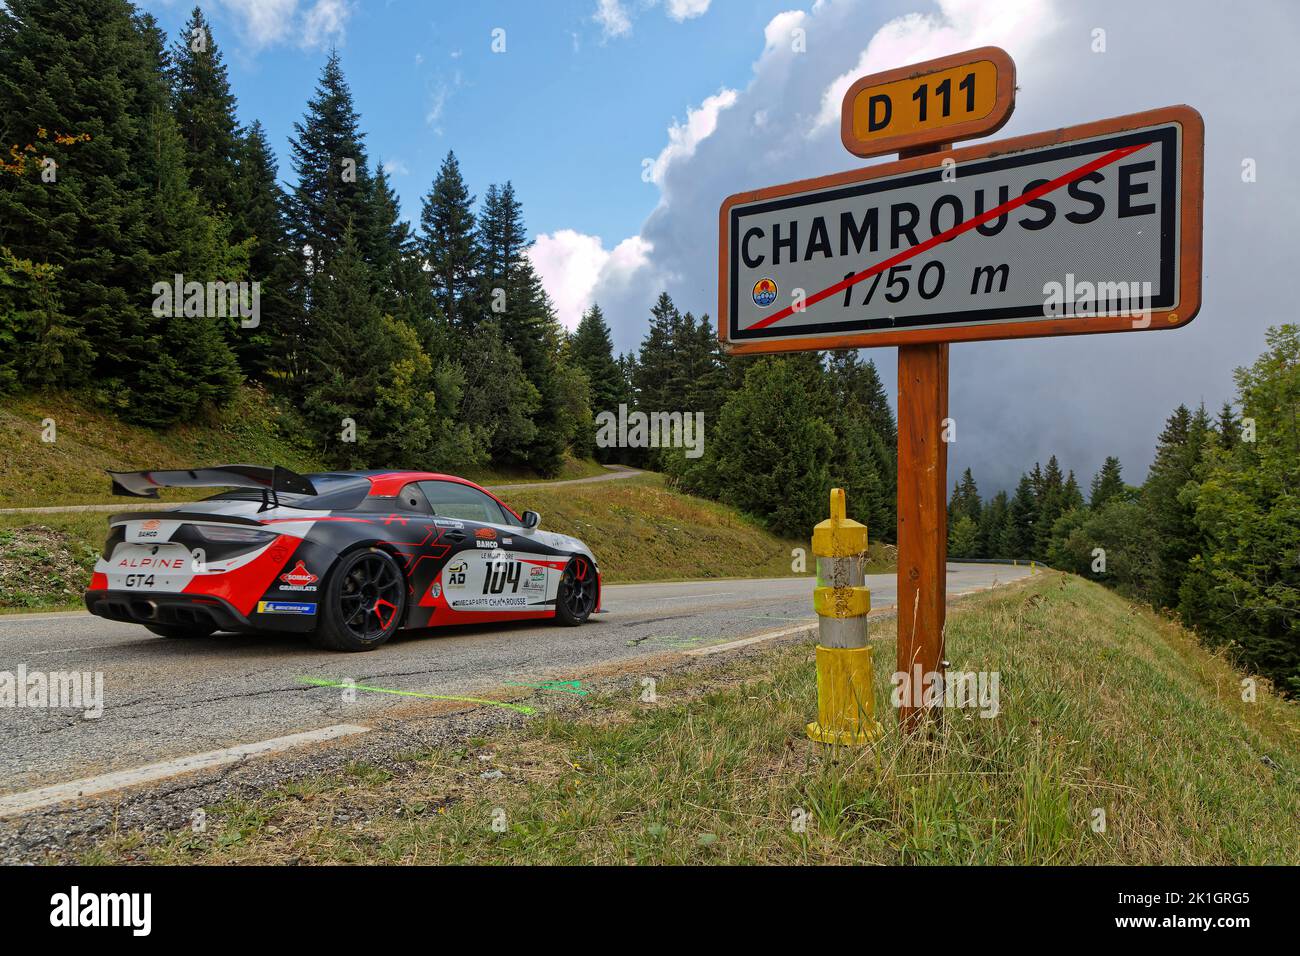 CHAMROUSSE, FRANCE, August 20, 2022 : A racing car runs in front of Chamrousse roadsign during uphill race. Hillclimbing is a branch of motorsport in Stock Photo